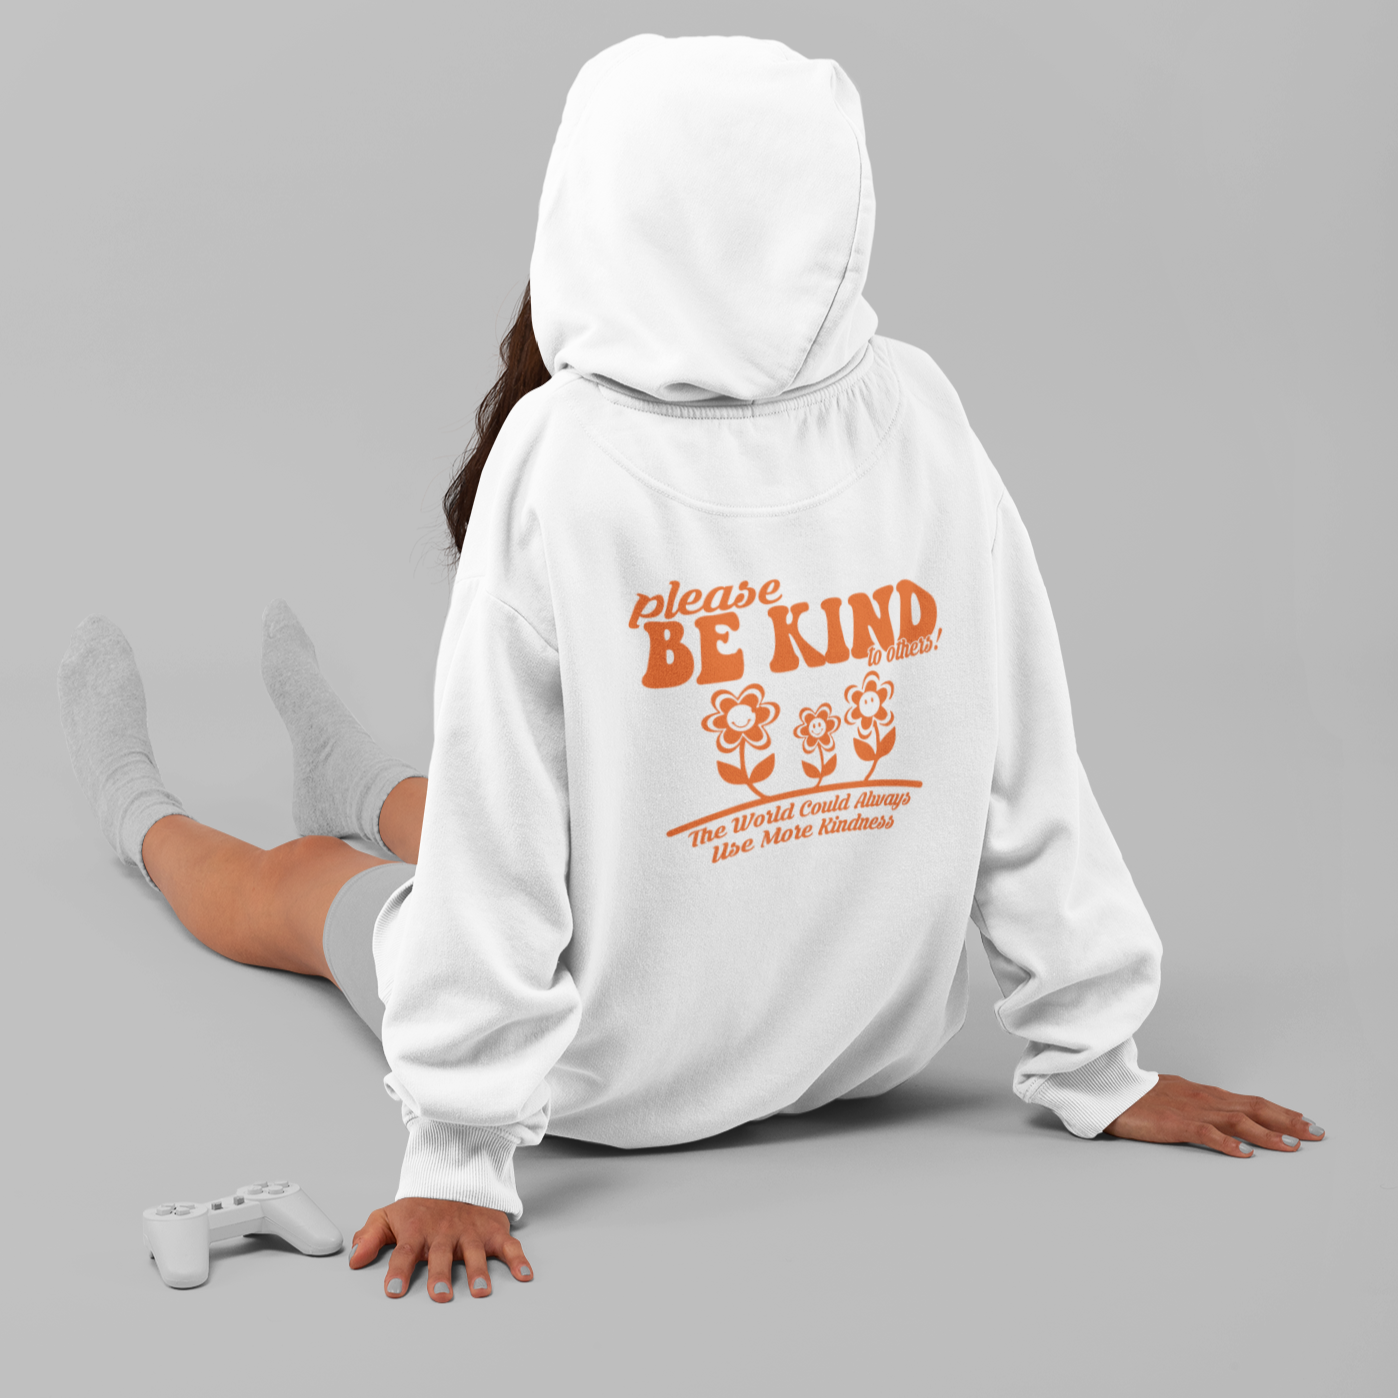 Please Be Kind - Full Color Heat Transfer